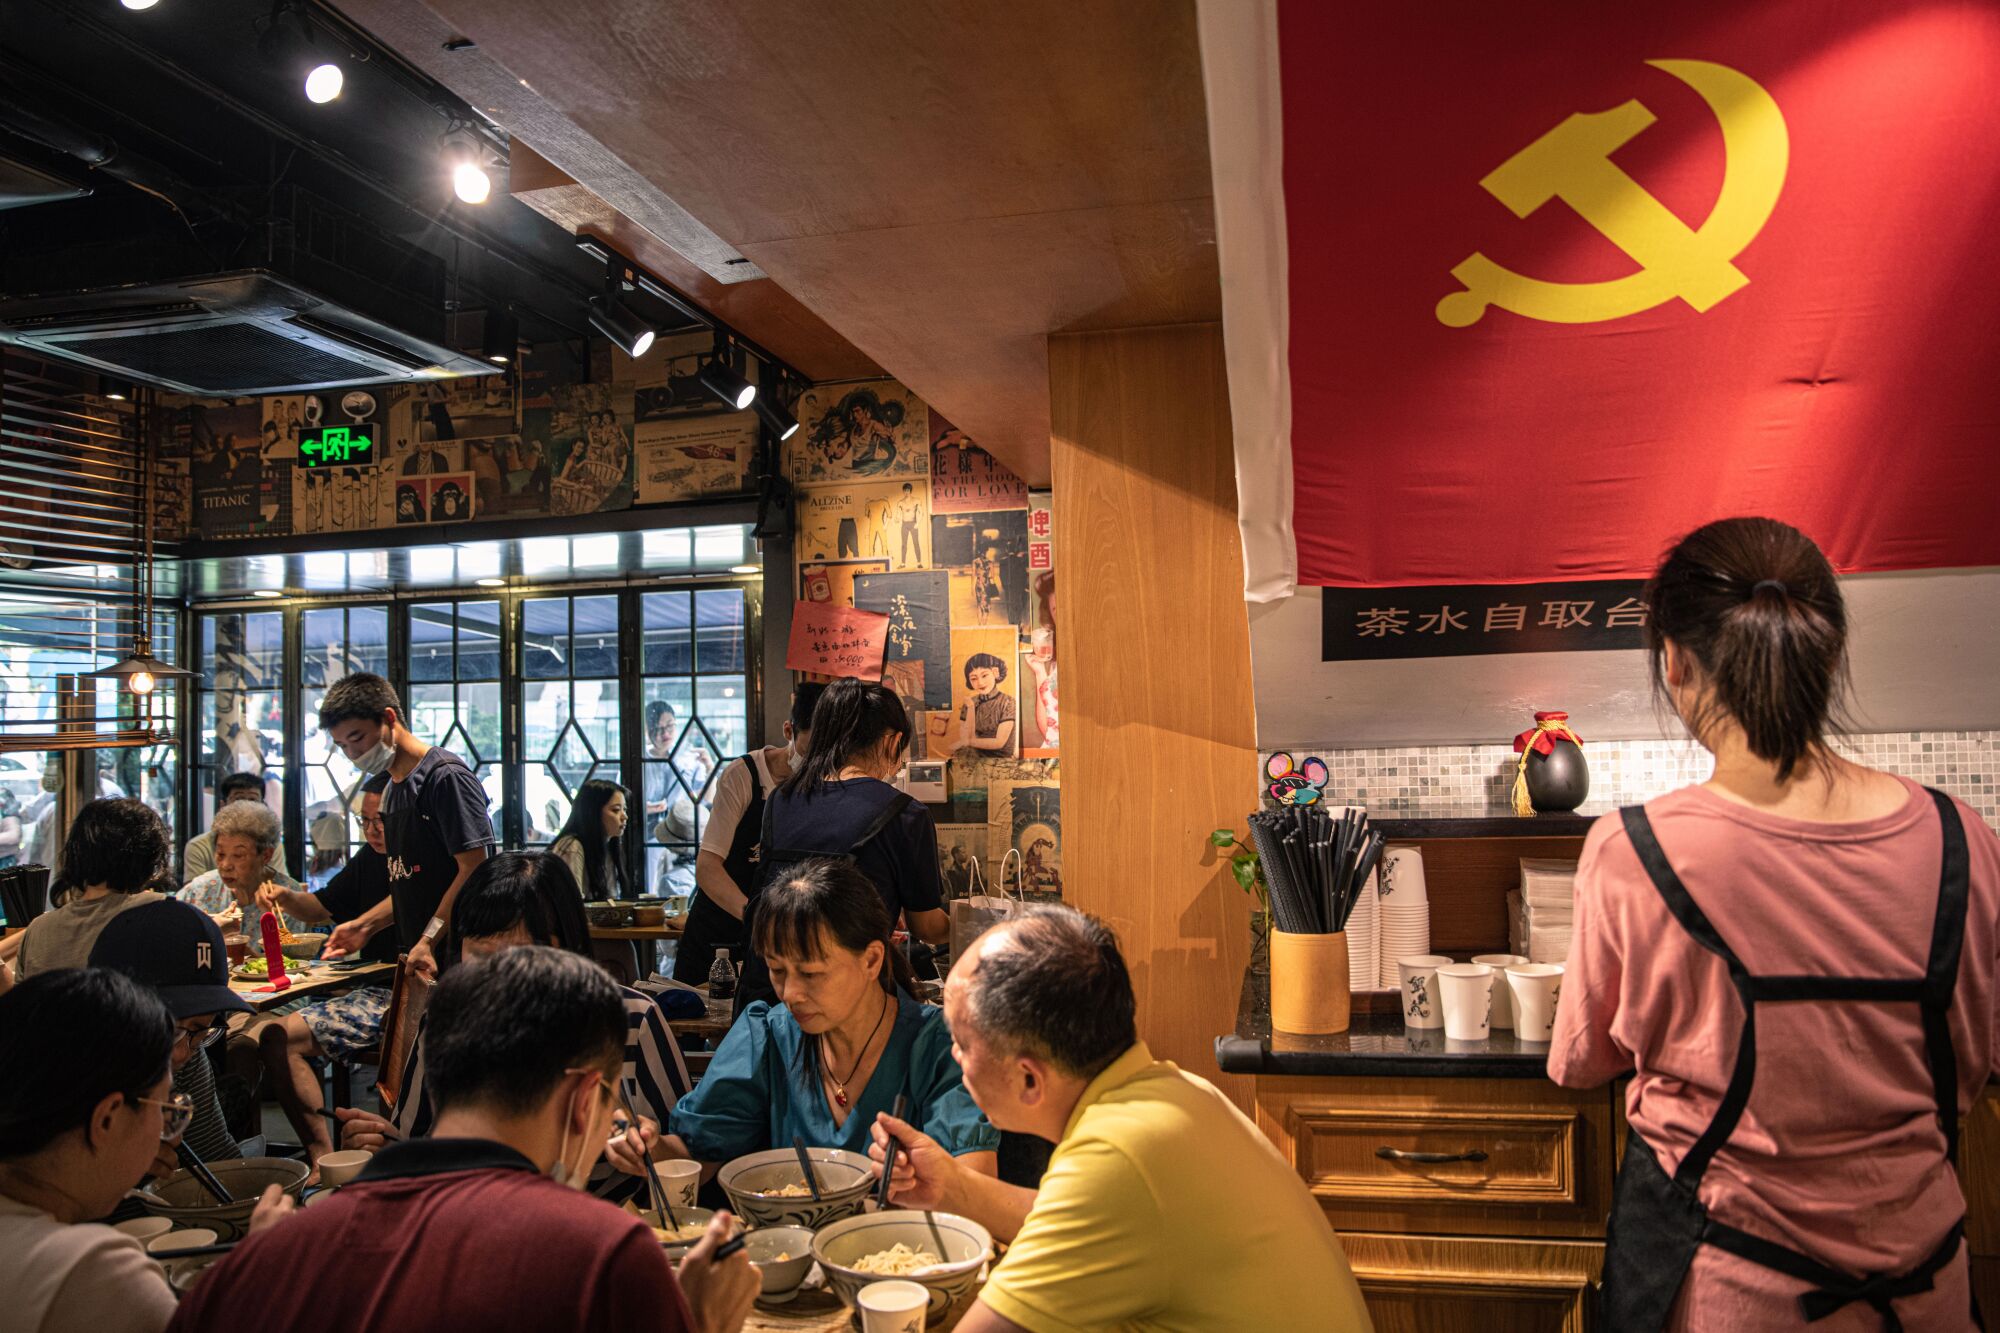 A red flag with a yellow hammer and sickle symbol hangs near people eating bowls of noodles at a table